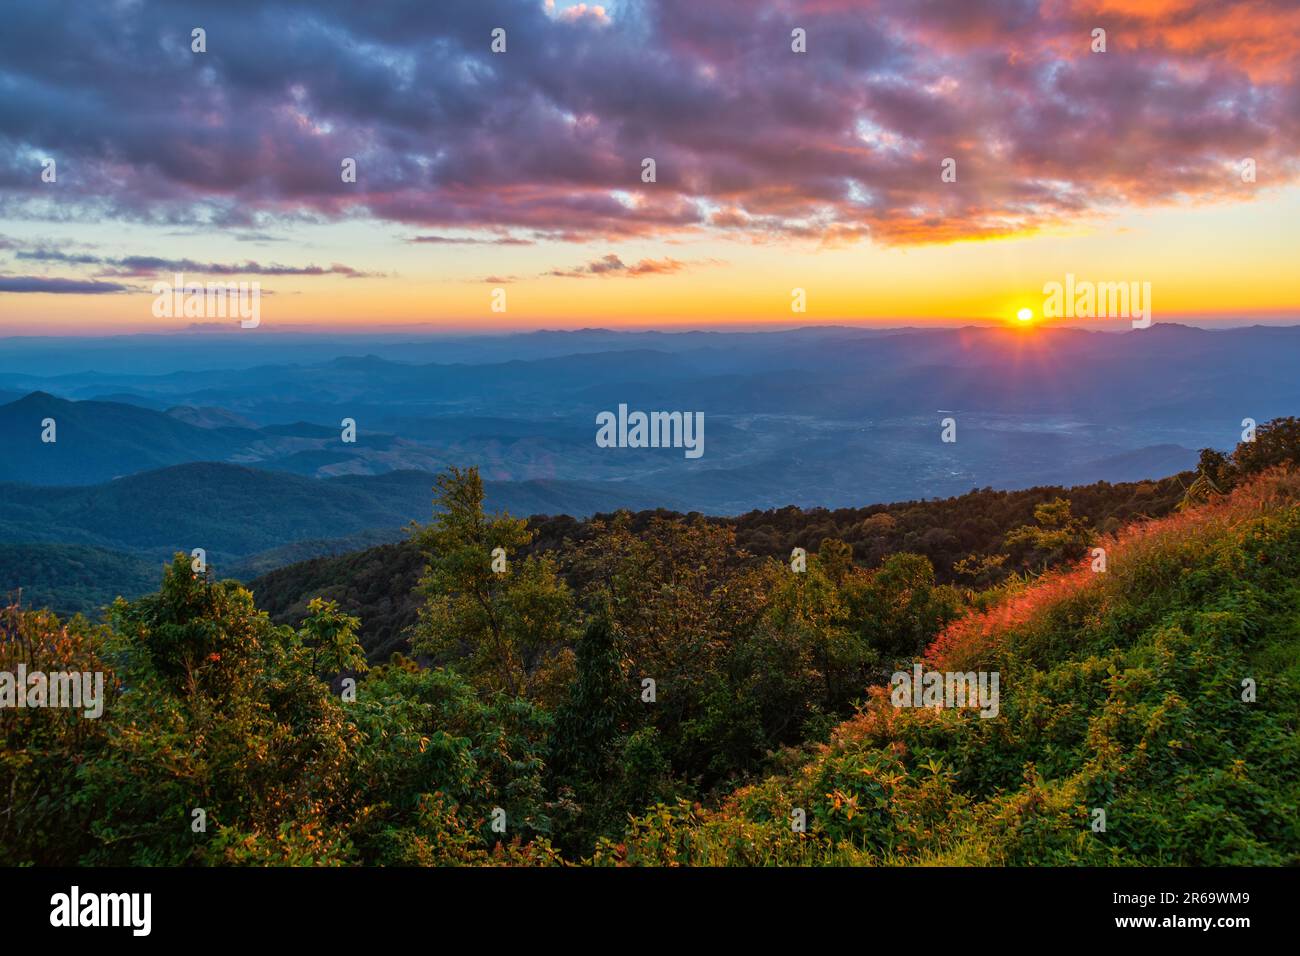 Tropical forest nature landscape sunset view with mountain range at Doi Inthanon, Chiang Mai Thailand Stock Photo